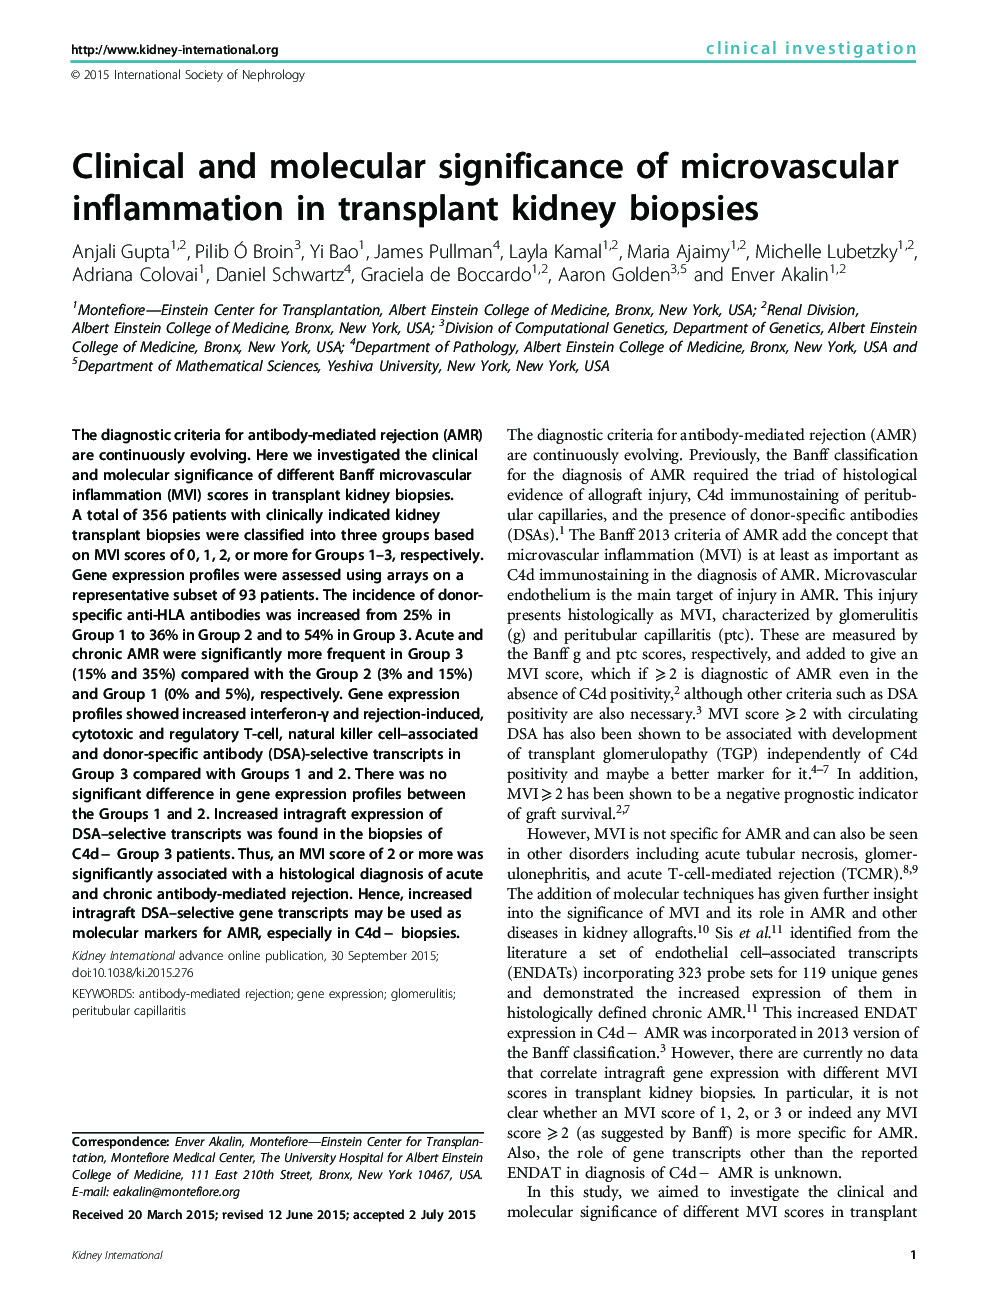 Clinical and molecular significance of microvascular inflammation in transplant kidney biopsies